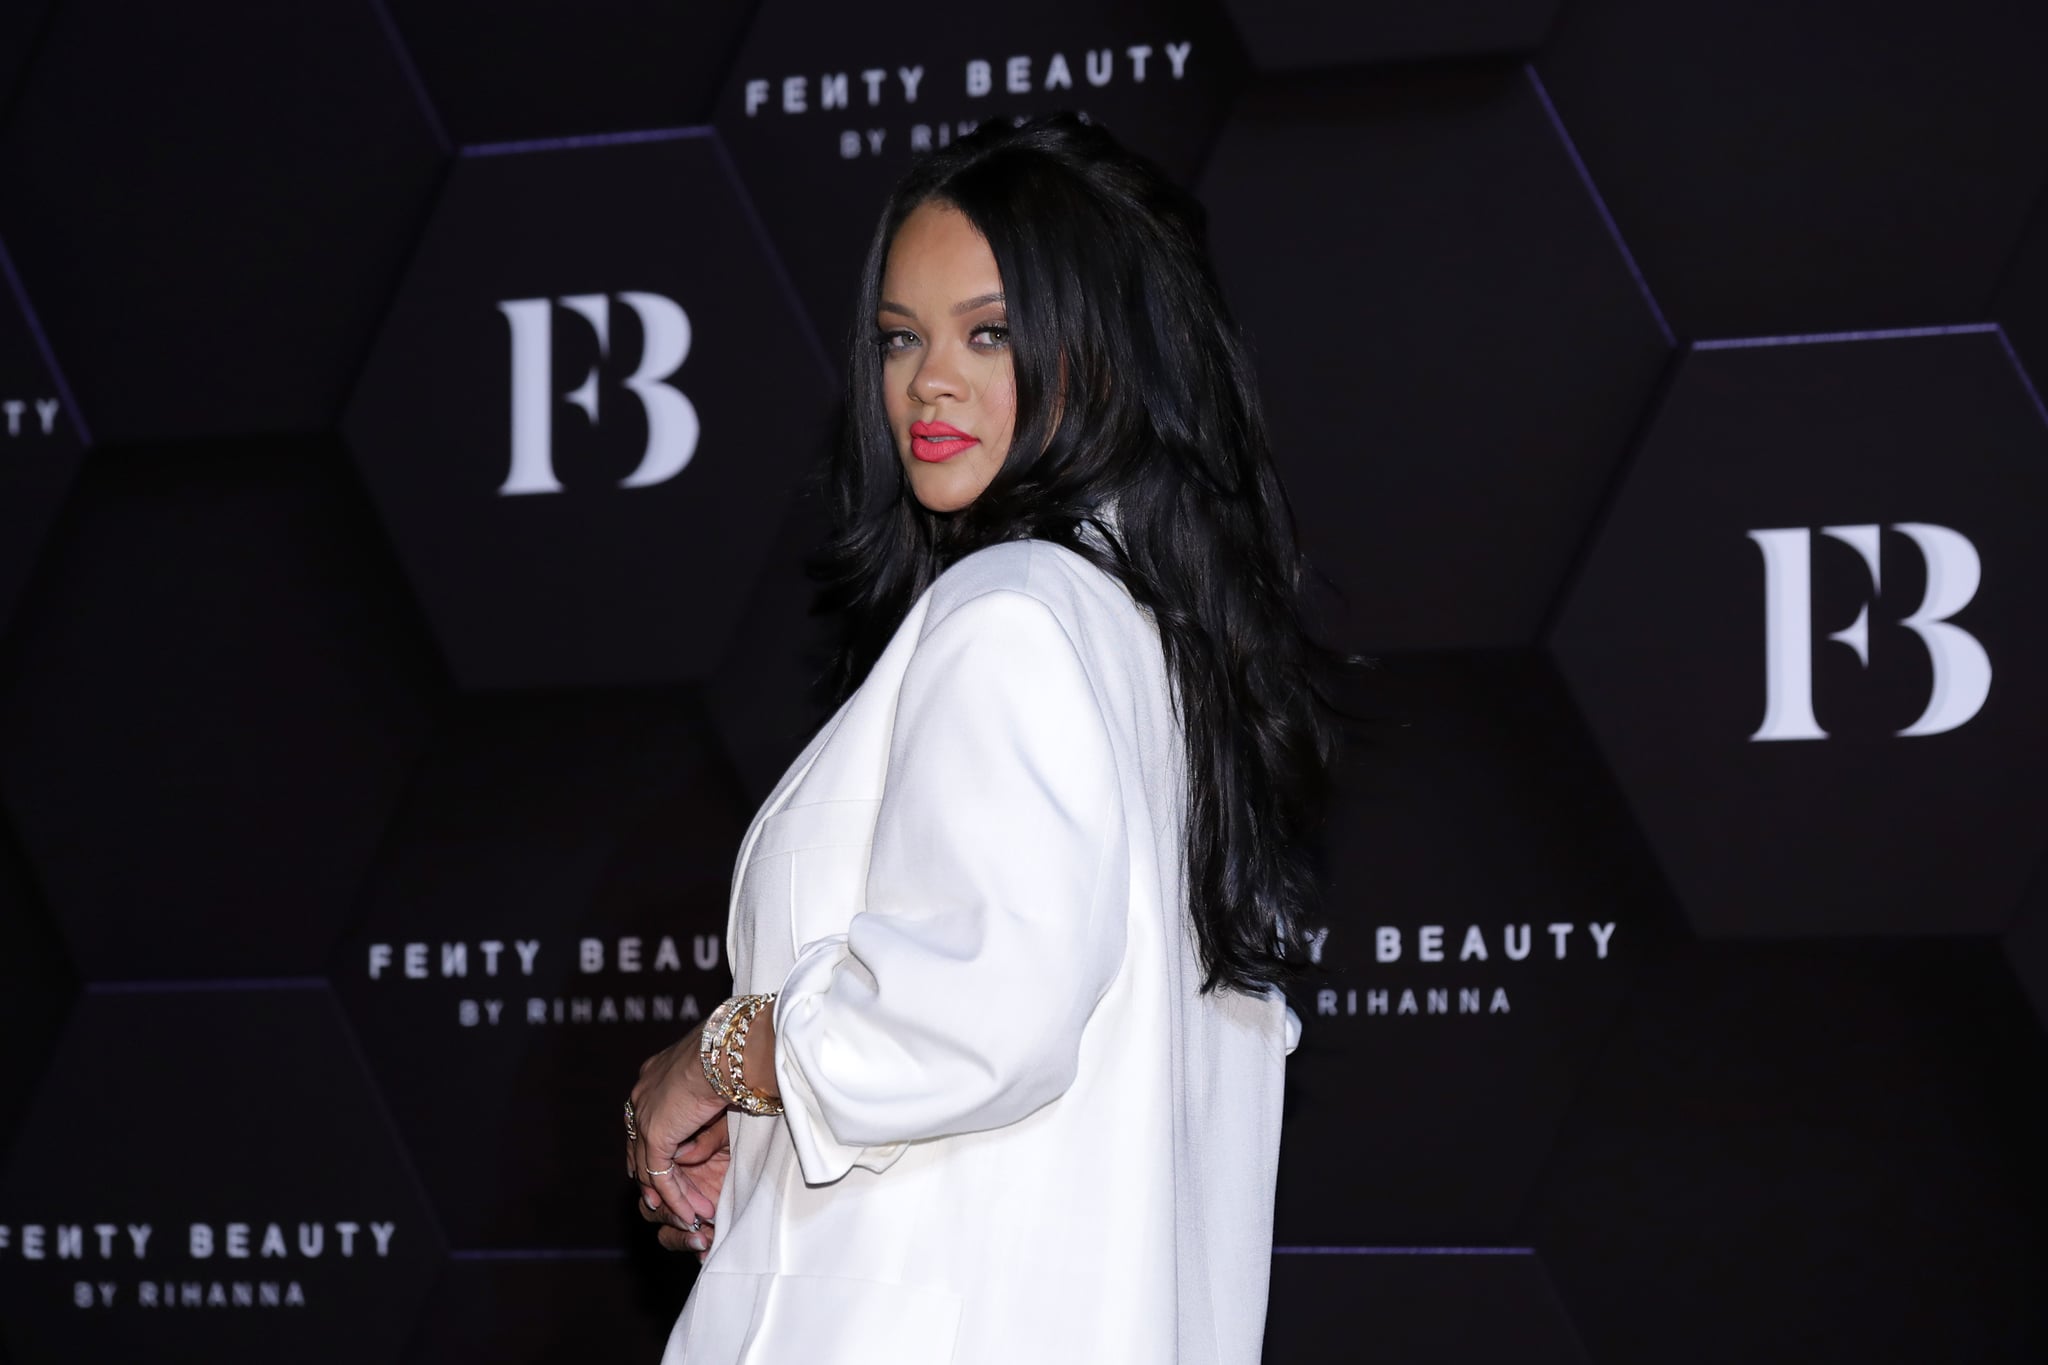 SEOUL, SOUTH KOREA - SEPTEMBER 17: ***South Korea Out*** Rihanna attends an event for 'FENTY BEAUTY' artistry beauty talk with Rihanna at Lotte World Tower on September 17, 2019 in Seoul, South Korea. (Photo by Han Myung-Gu/WireImage)